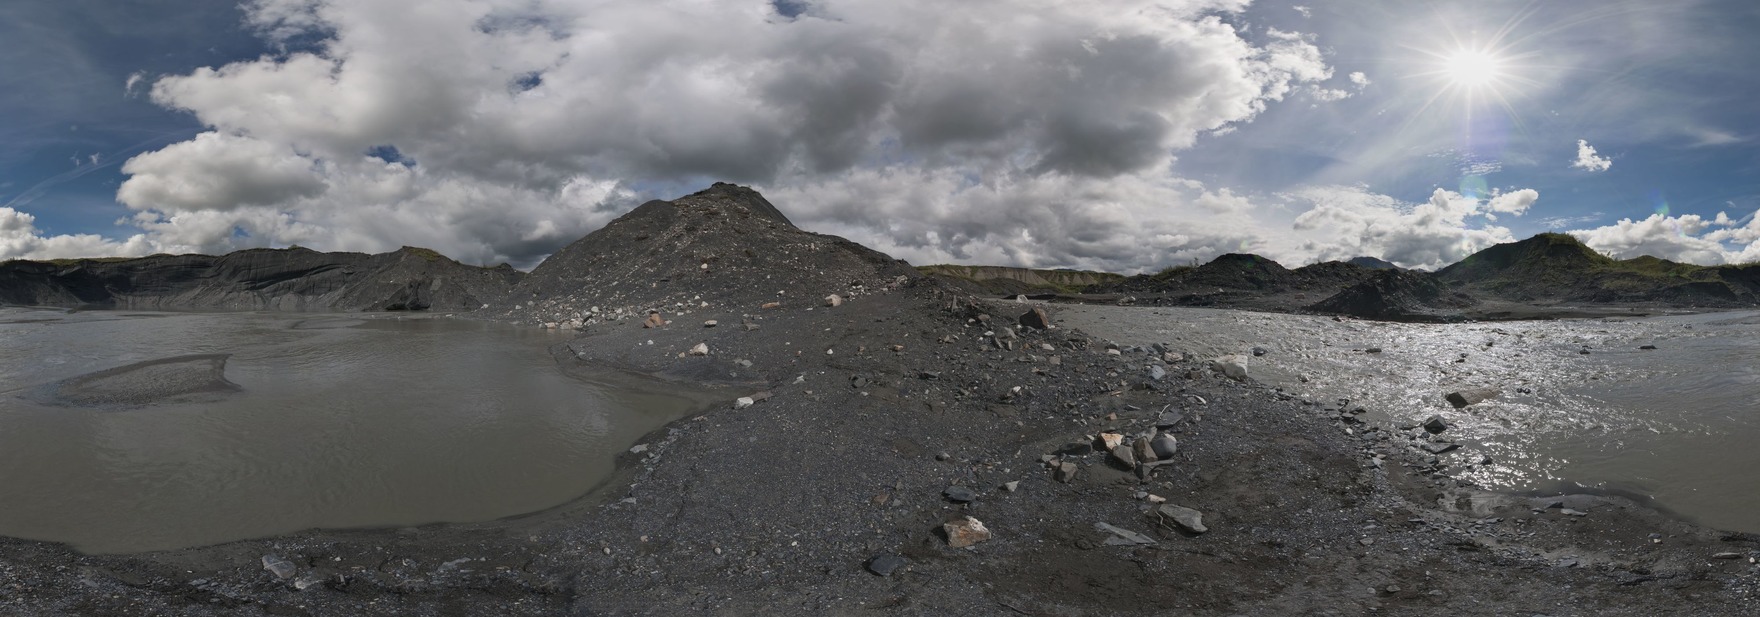 rocky, dirty landscape with pools of water and clumps of rocks over ice